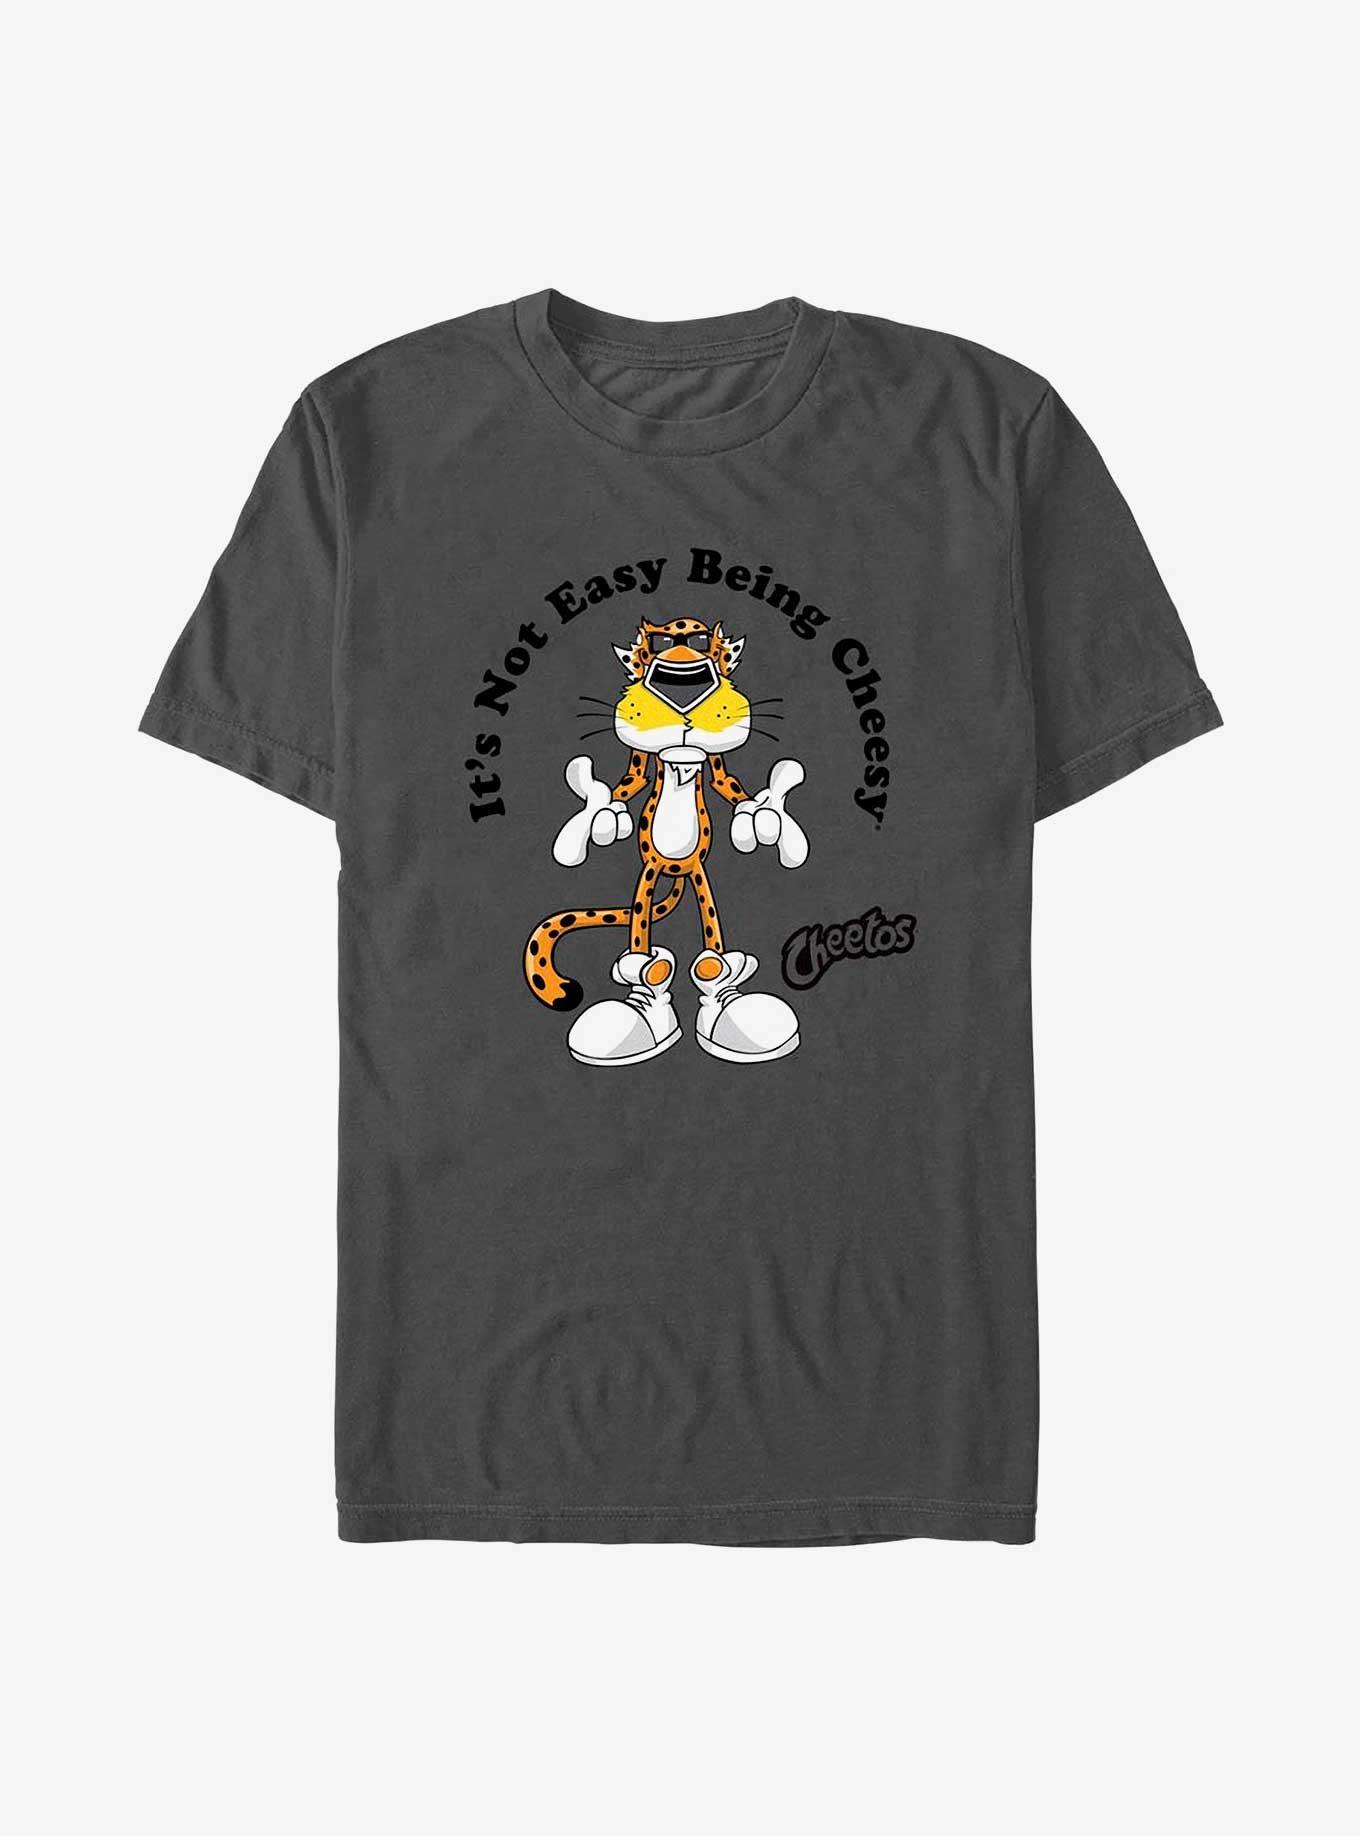 Cheetos Chester It's Not Easy Being Cheesy T-Shirt, CHARCOAL, hi-res